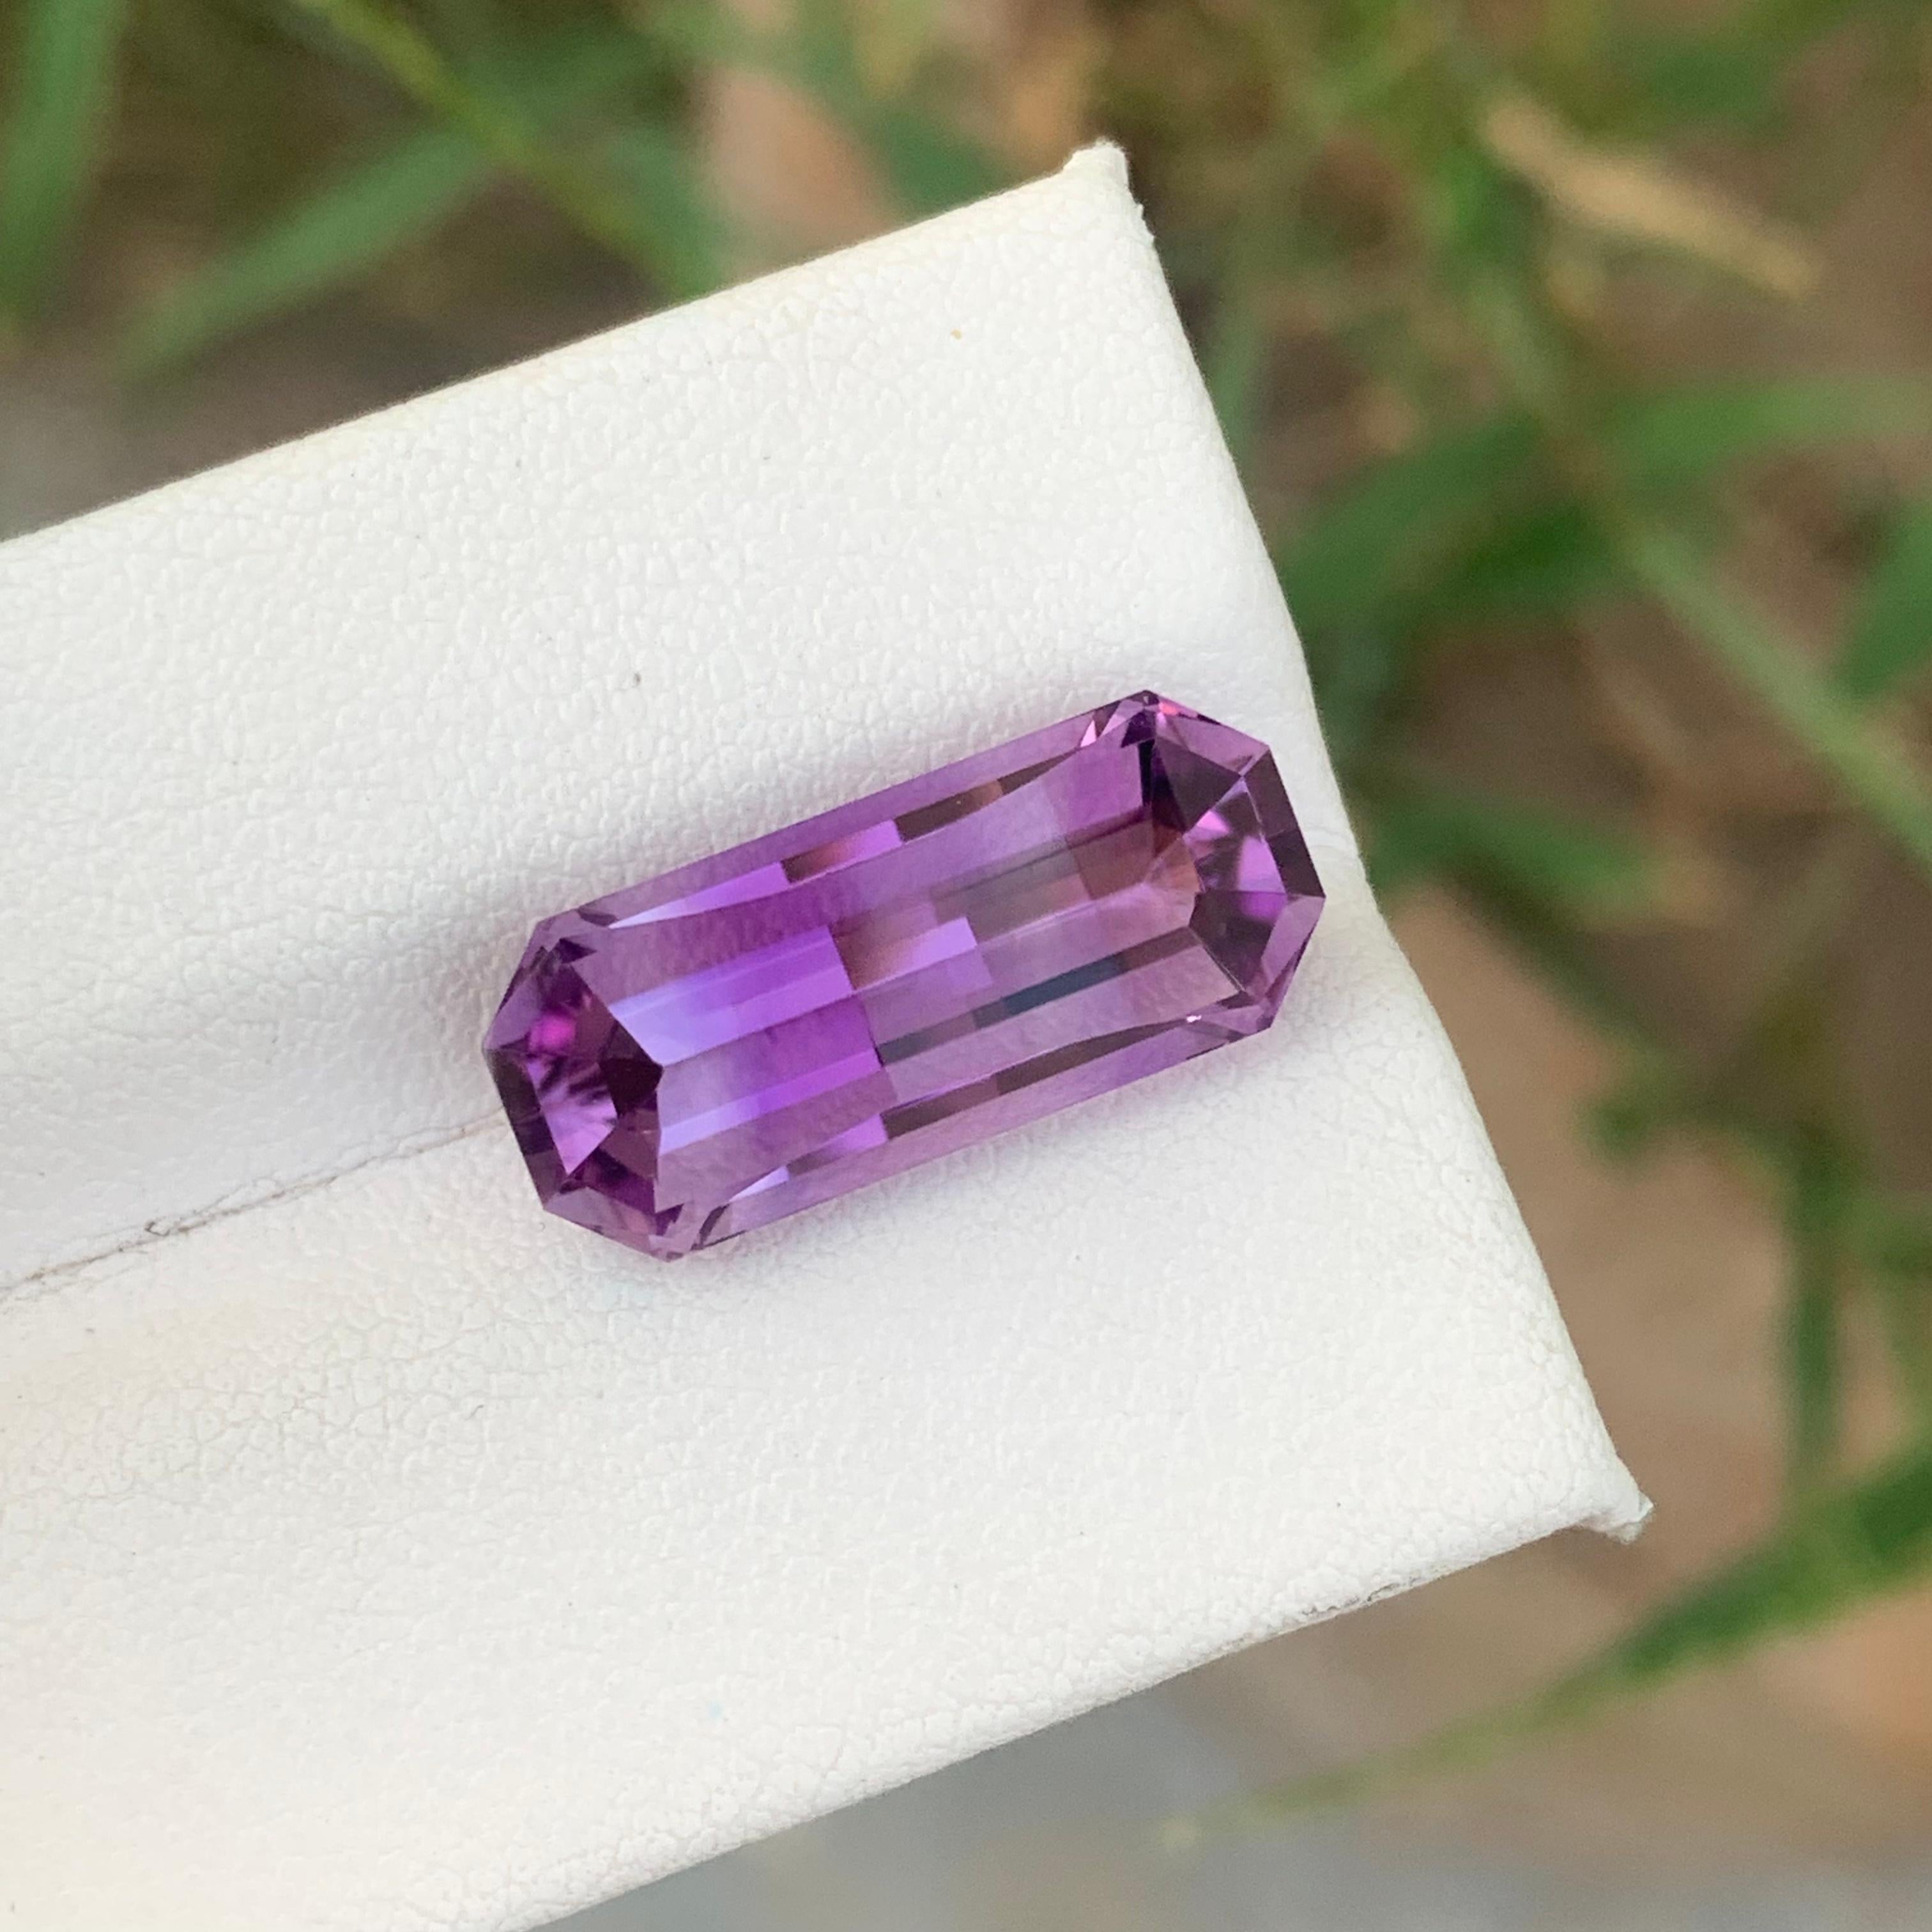 8.25cts Natural Loose Amethyst Gemstone Pixel Pixelated Cut From Brazil Mine For Sale 7